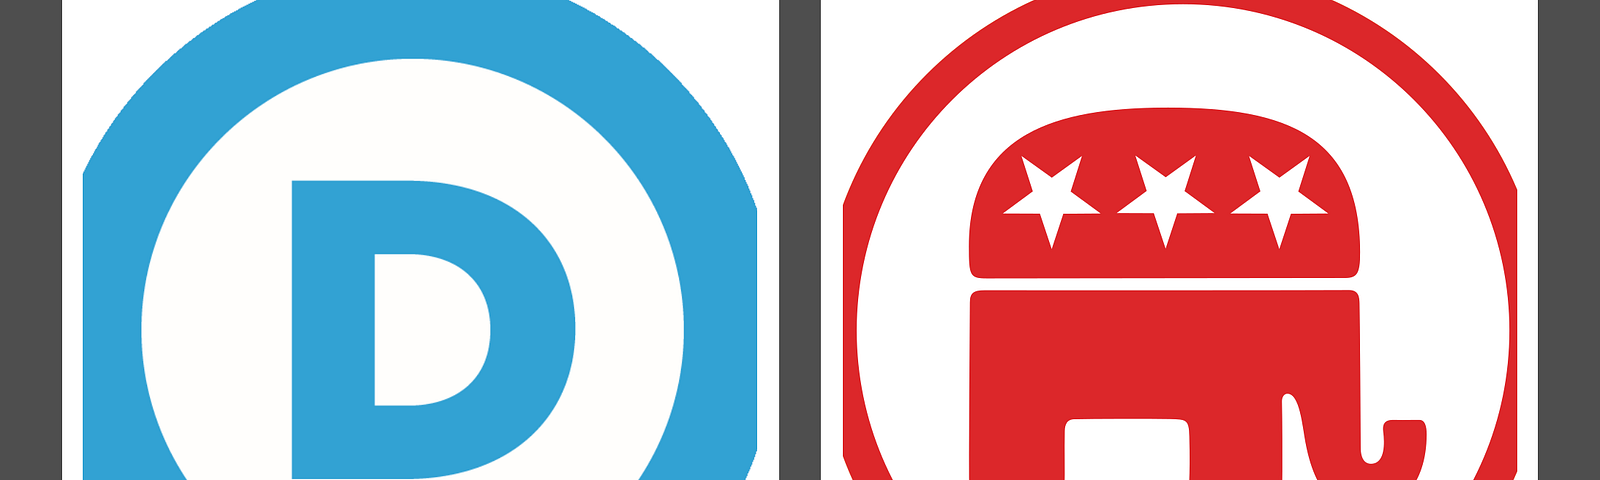 A constructed image, of our two political party logos; the BLUE ‘circle D’ on the left, and the RED ‘starred elephant’ on the right. Bounded in a grey frame.